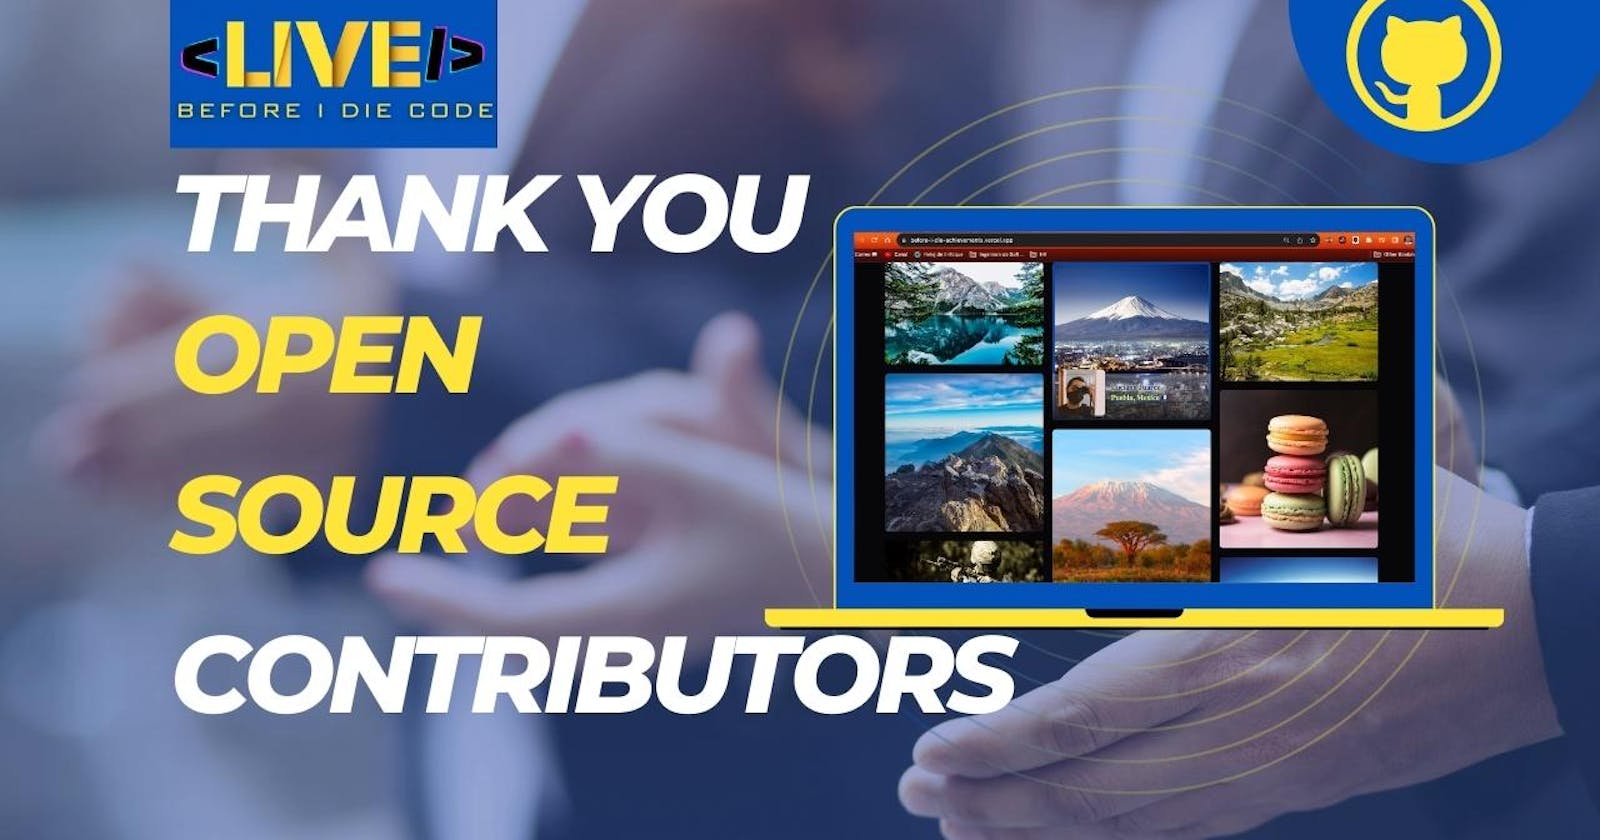 Thank you to the Contributors of Before I Die Code week # 2